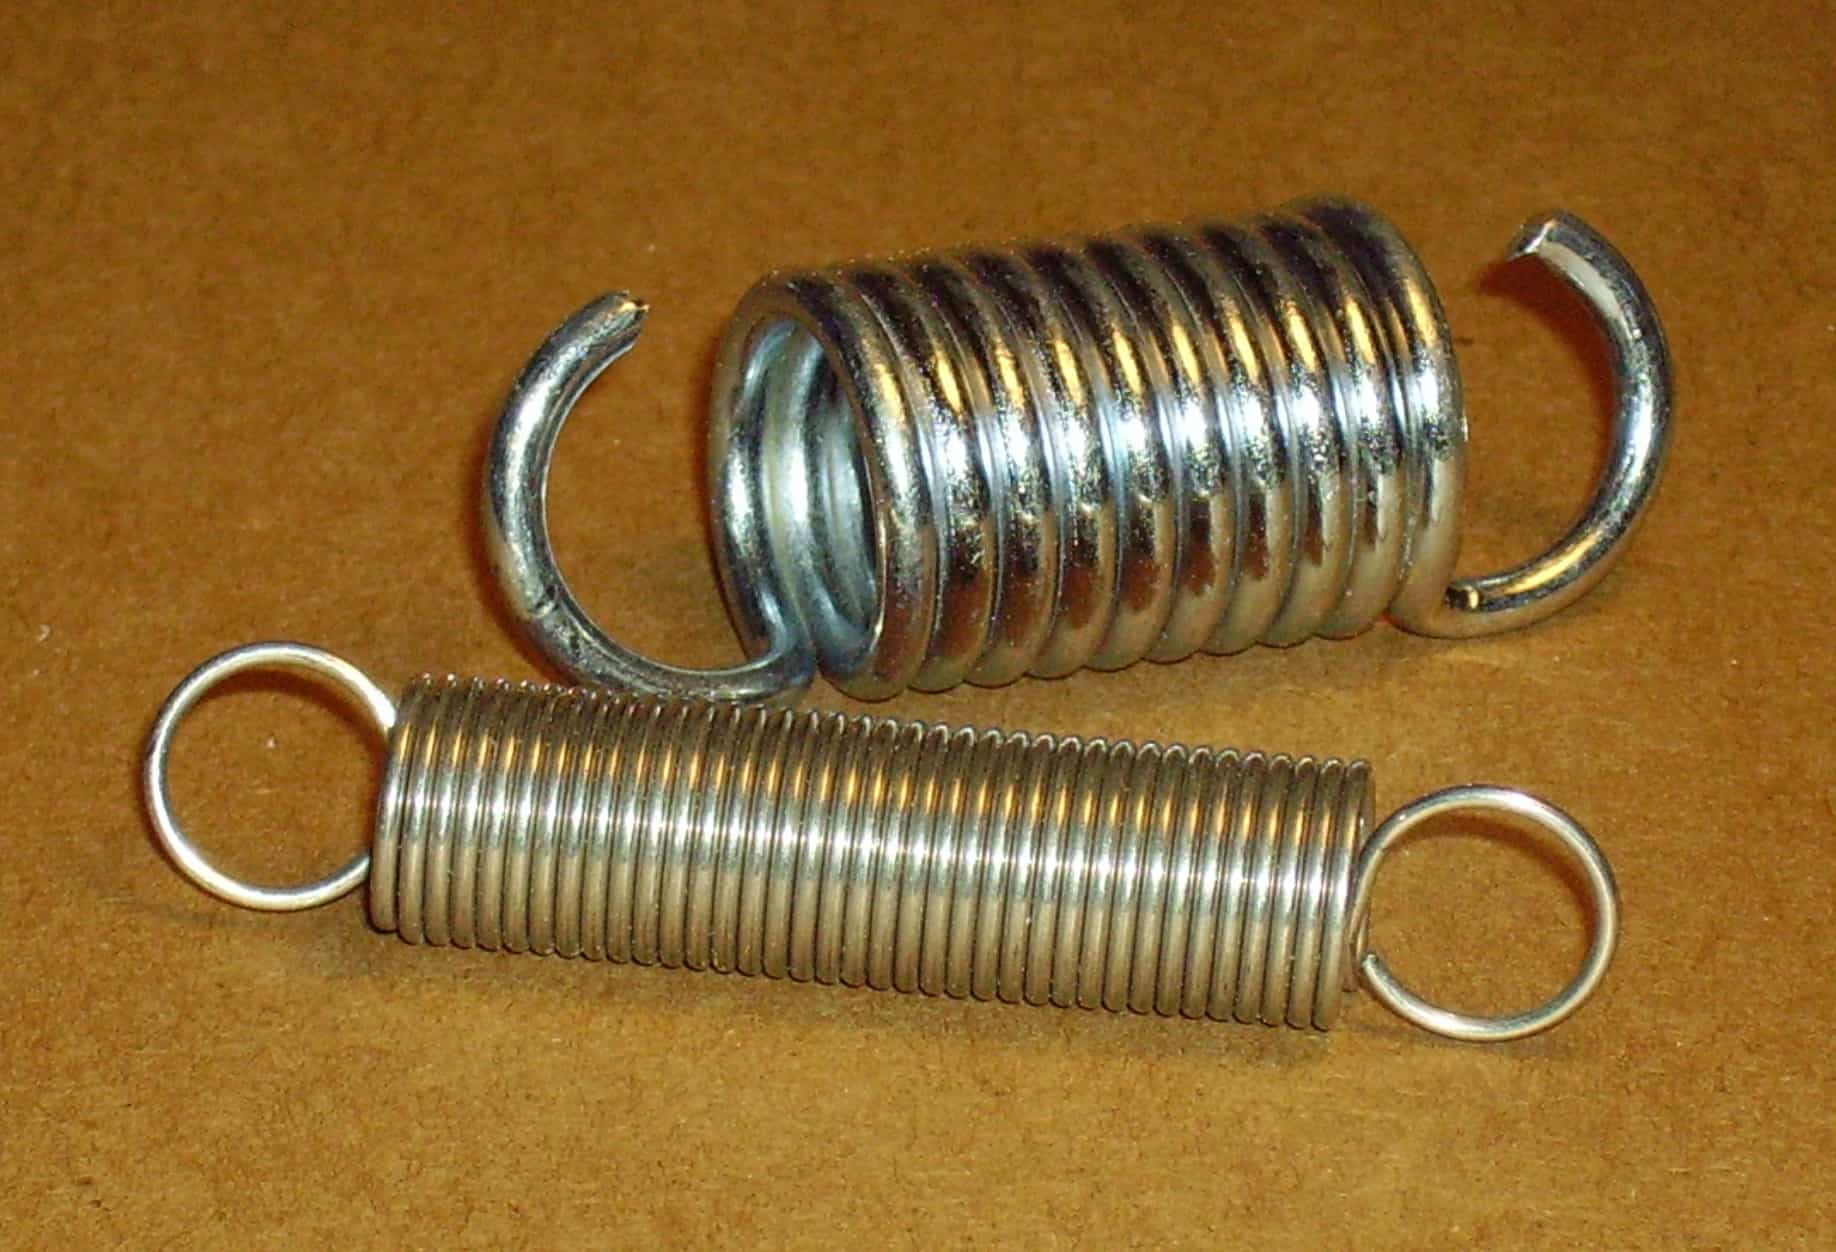 Two springs on a table